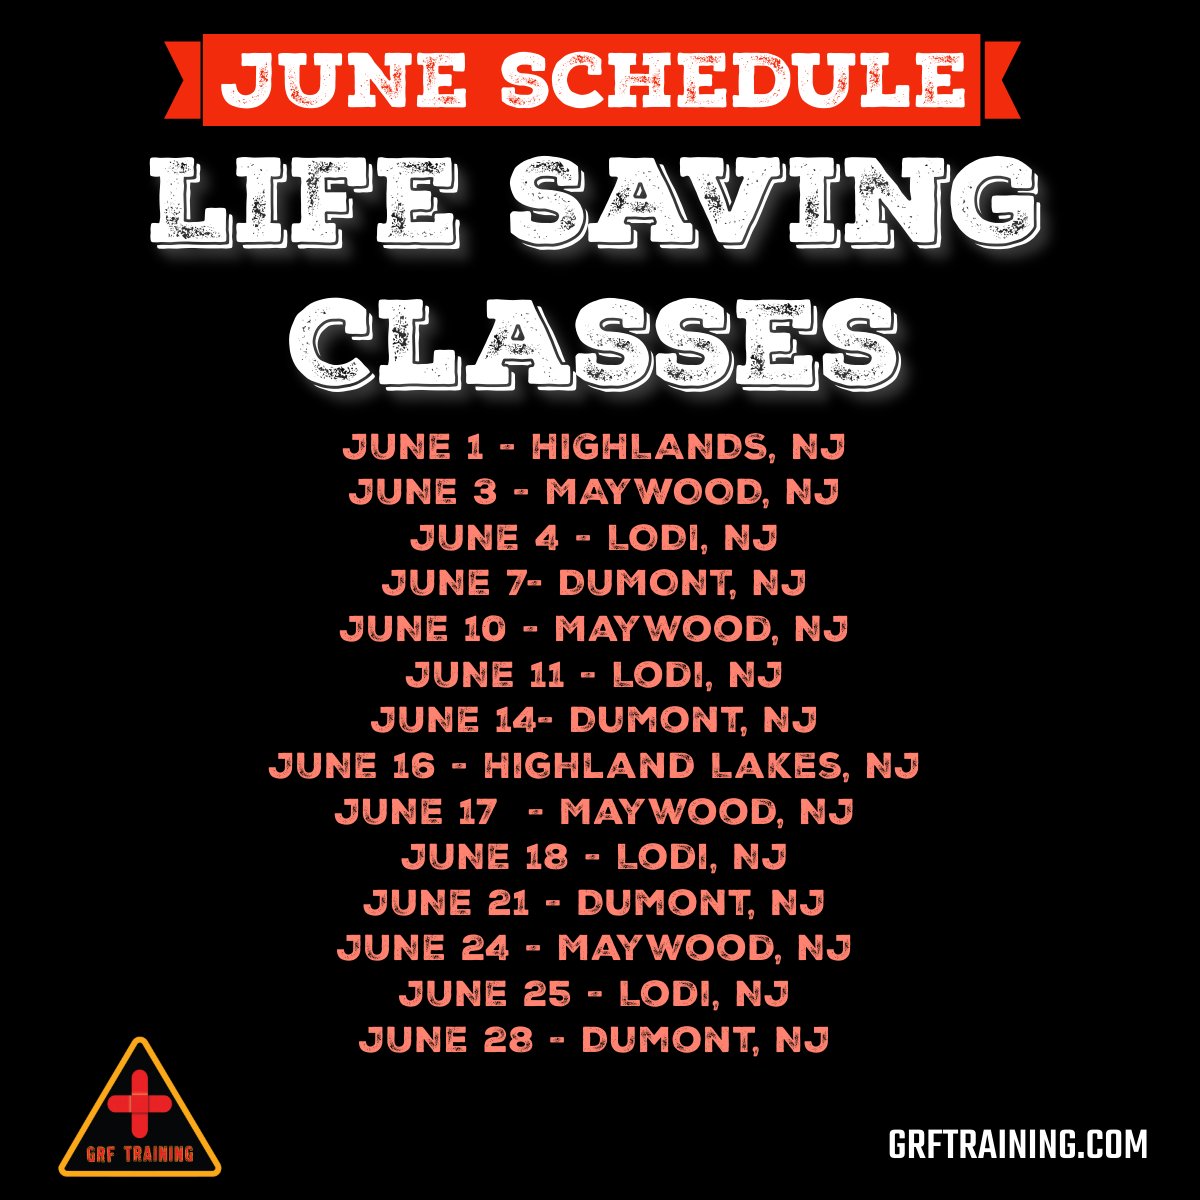 Contact GRF Training today to enroll in a class. You never know when the need for these skills might unexpectedly arise.
(201) 596-4204
Skills Save Lives!
#cprtraining #americanredcross #firstaidtraining #cardiacarrestsurvivor #June2024 #skillssavelives #Juneclasses #GRFTraining